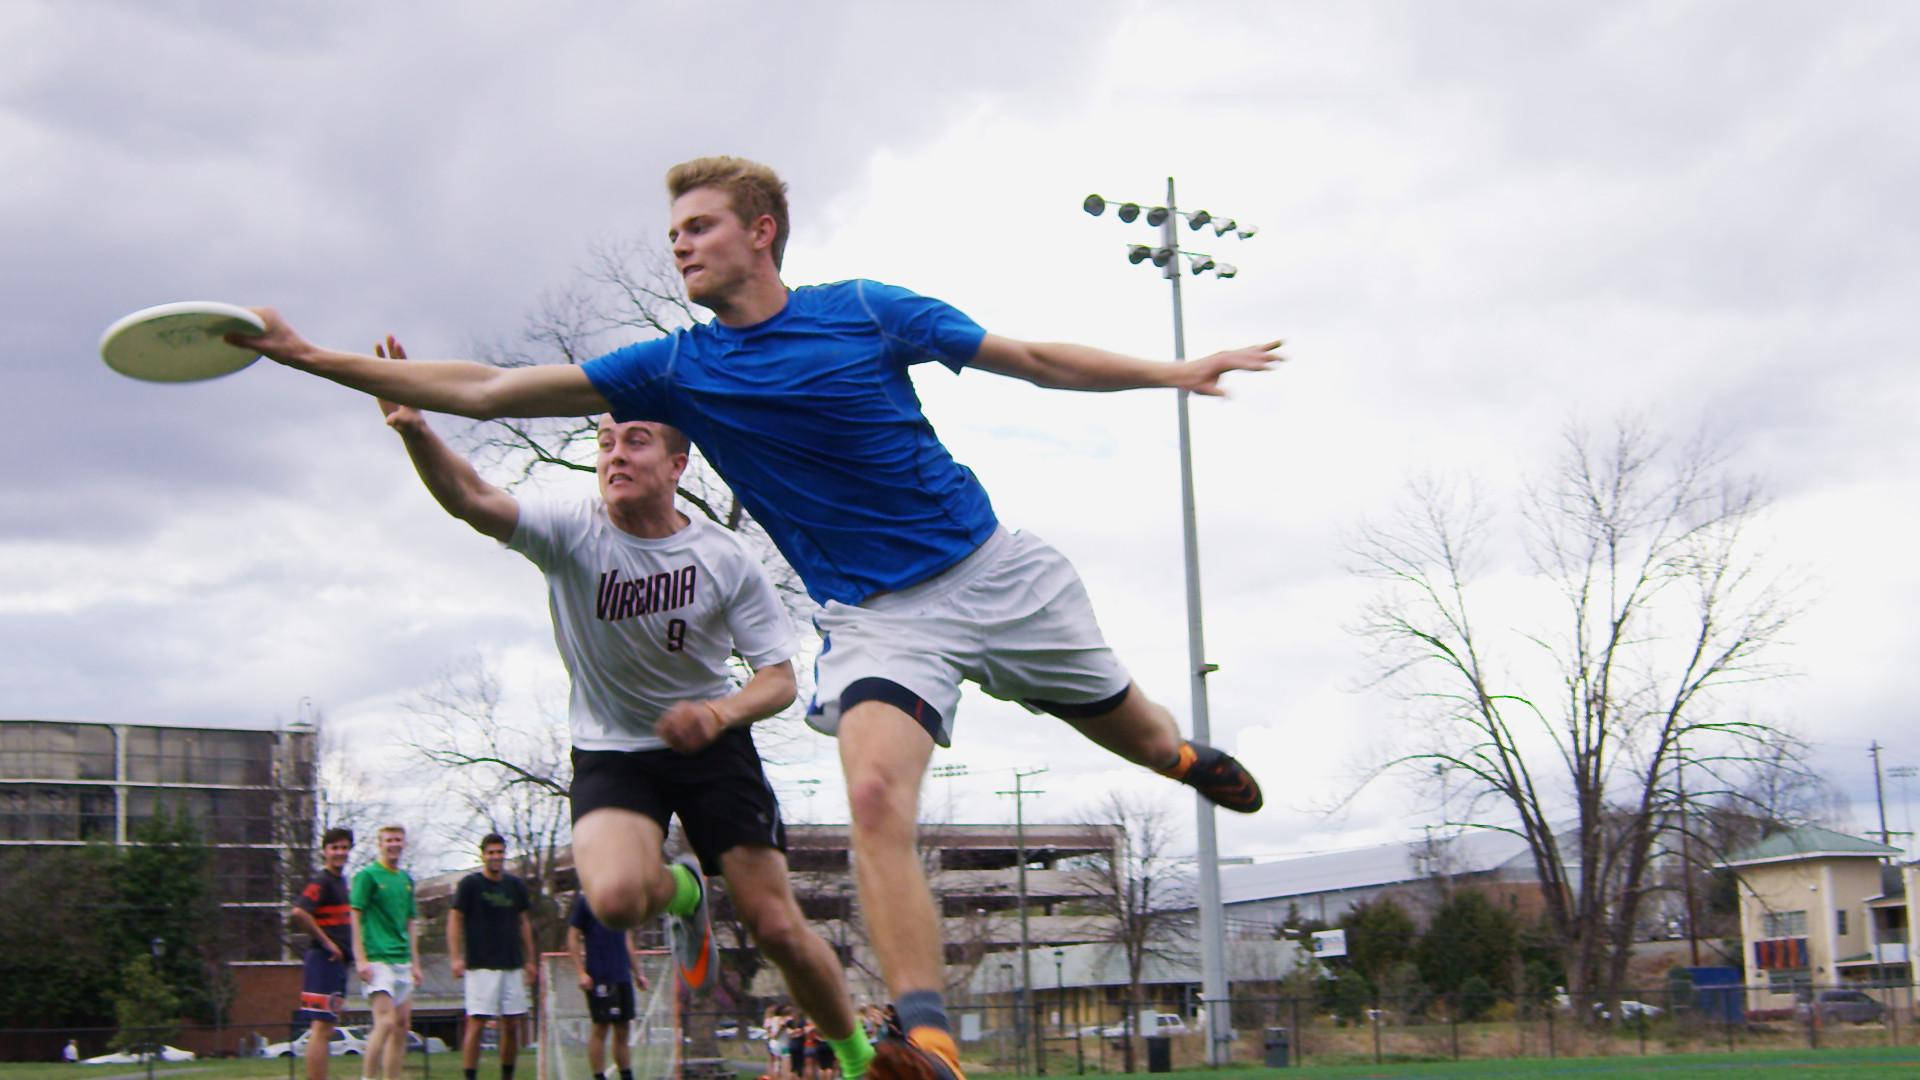 Catching Ultimate Frisbee Disc Wallpaper